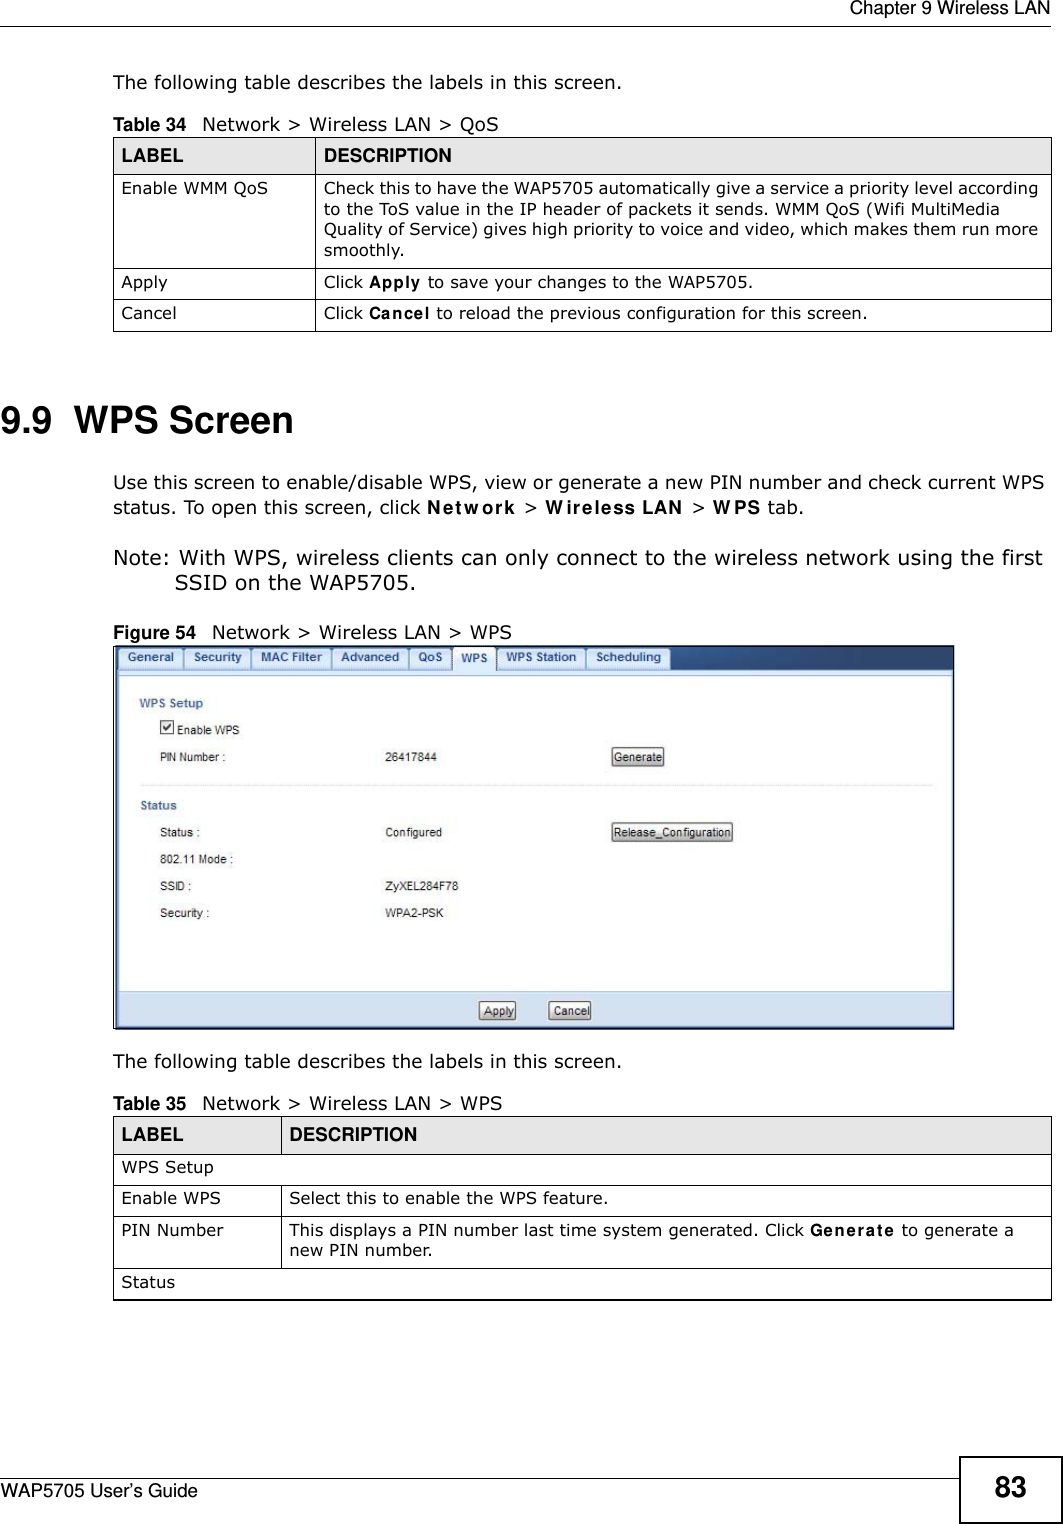  Chapter 9 Wireless LANWAP5705 User’s Guide 83The following table describes the labels in this screen. 9.9  WPS Screen  Use this screen to enable/disable WPS, view or generate a new PIN number and check current WPS status. To open this screen, click N e t w ork &gt; W irele ss LAN  &gt; W PS tab.Note: With WPS, wireless clients can only connect to the wireless network using the first SSID on the WAP5705.Figure 54   Network &gt; Wireless LAN &gt; WPSThe following table describes the labels in this screen.Table 34   Network &gt; Wireless LAN &gt; QoSLABEL DESCRIPTIONEnable WMM QoS Check this to have the WAP5705 automatically give a service a priority level according to the ToS value in the IP header of packets it sends. WMM QoS (Wifi MultiMedia Quality of Service) gives high priority to voice and video, which makes them run more smoothly.Apply Click Apply to save your changes to the WAP5705.Cancel Click Cancel to reload the previous configuration for this screen.Table 35   Network &gt; Wireless LAN &gt; WPSLABEL DESCRIPTIONWPS SetupEnable WPS Select this to enable the WPS feature.PIN Number This displays a PIN number last time system generated. Click Ge ne r a t e to generate a new PIN number.Status